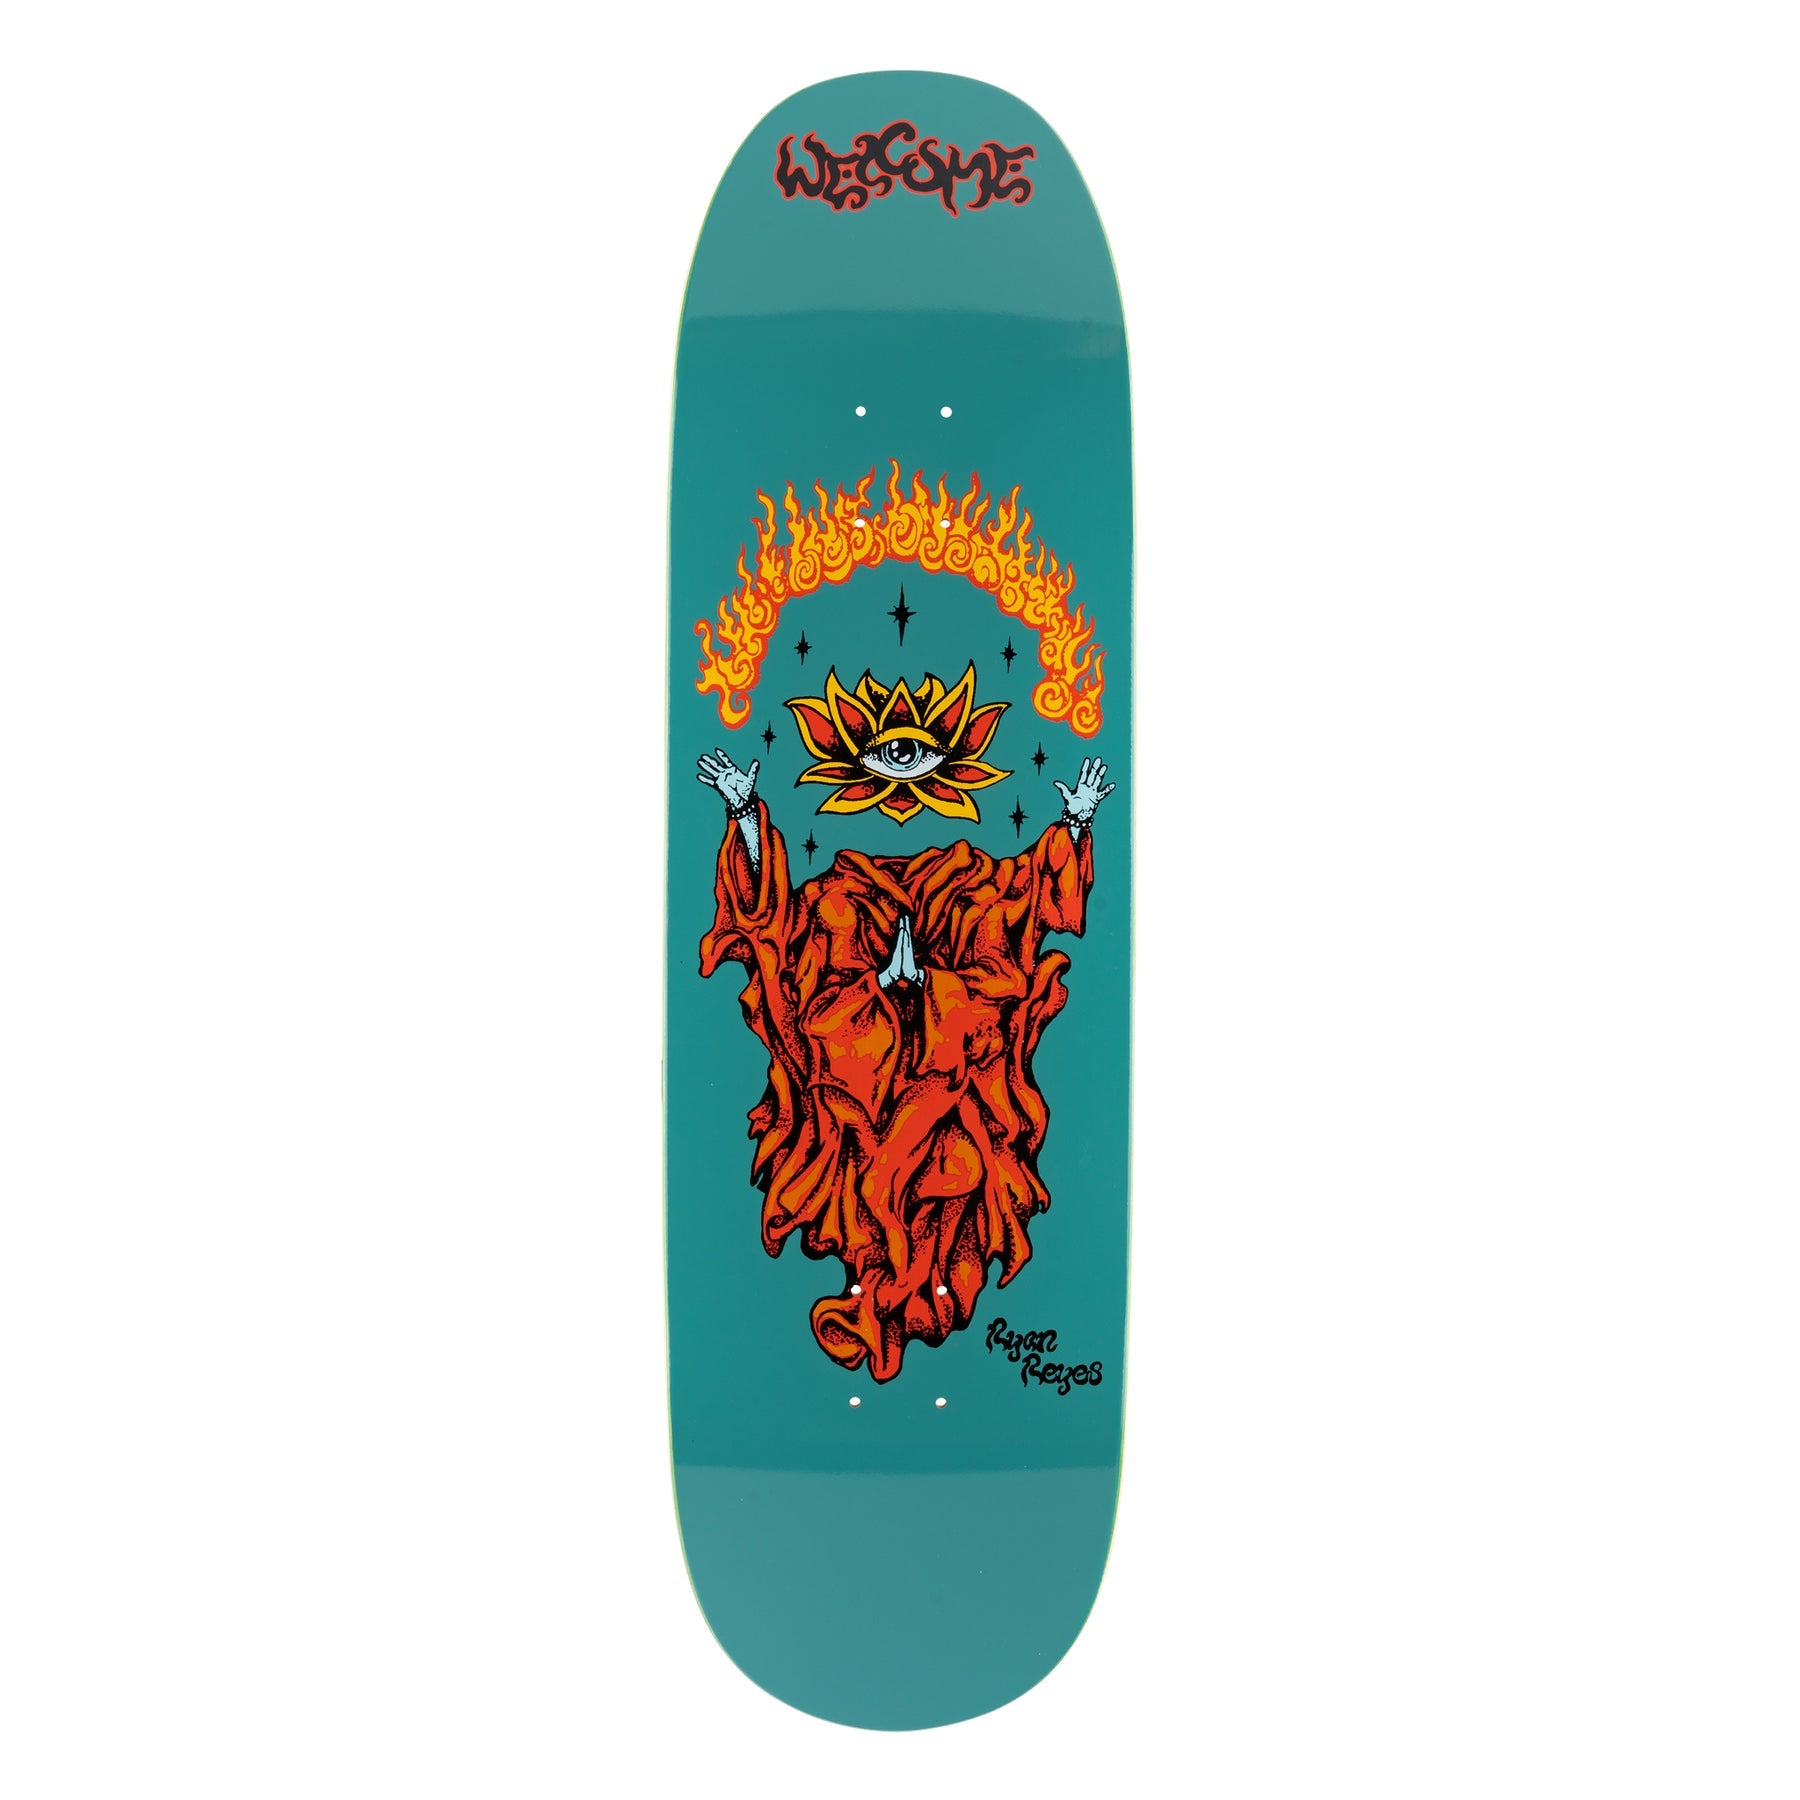 WELCOME DECK RYAN REYES - BACULUS 2 SHAPE (9&quot;)